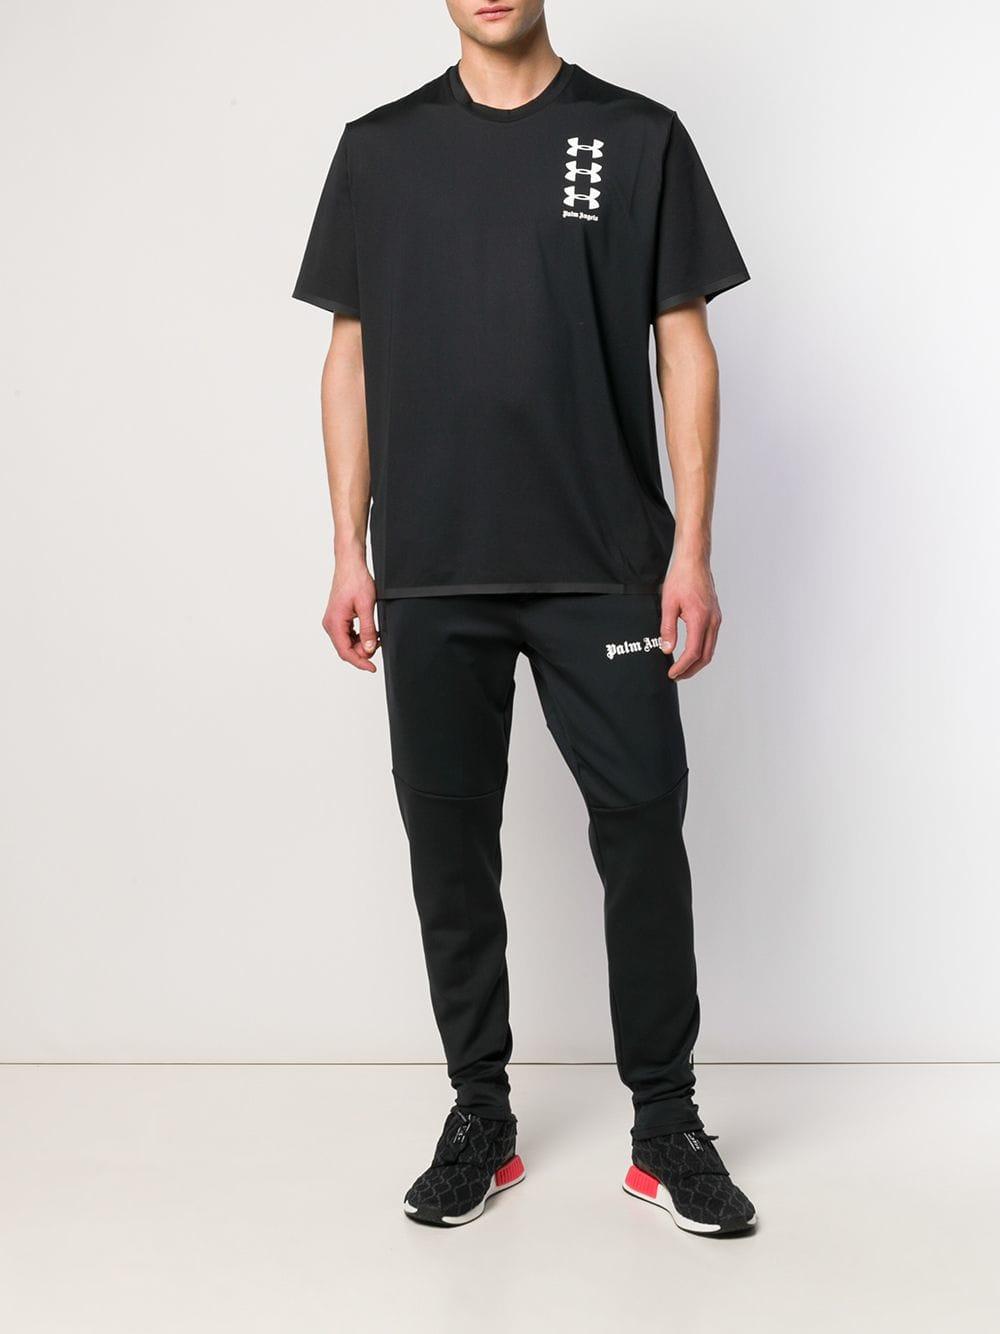 Palm Angels X Under Armour Recovery T-shirt in Black for Men | Lyst UK